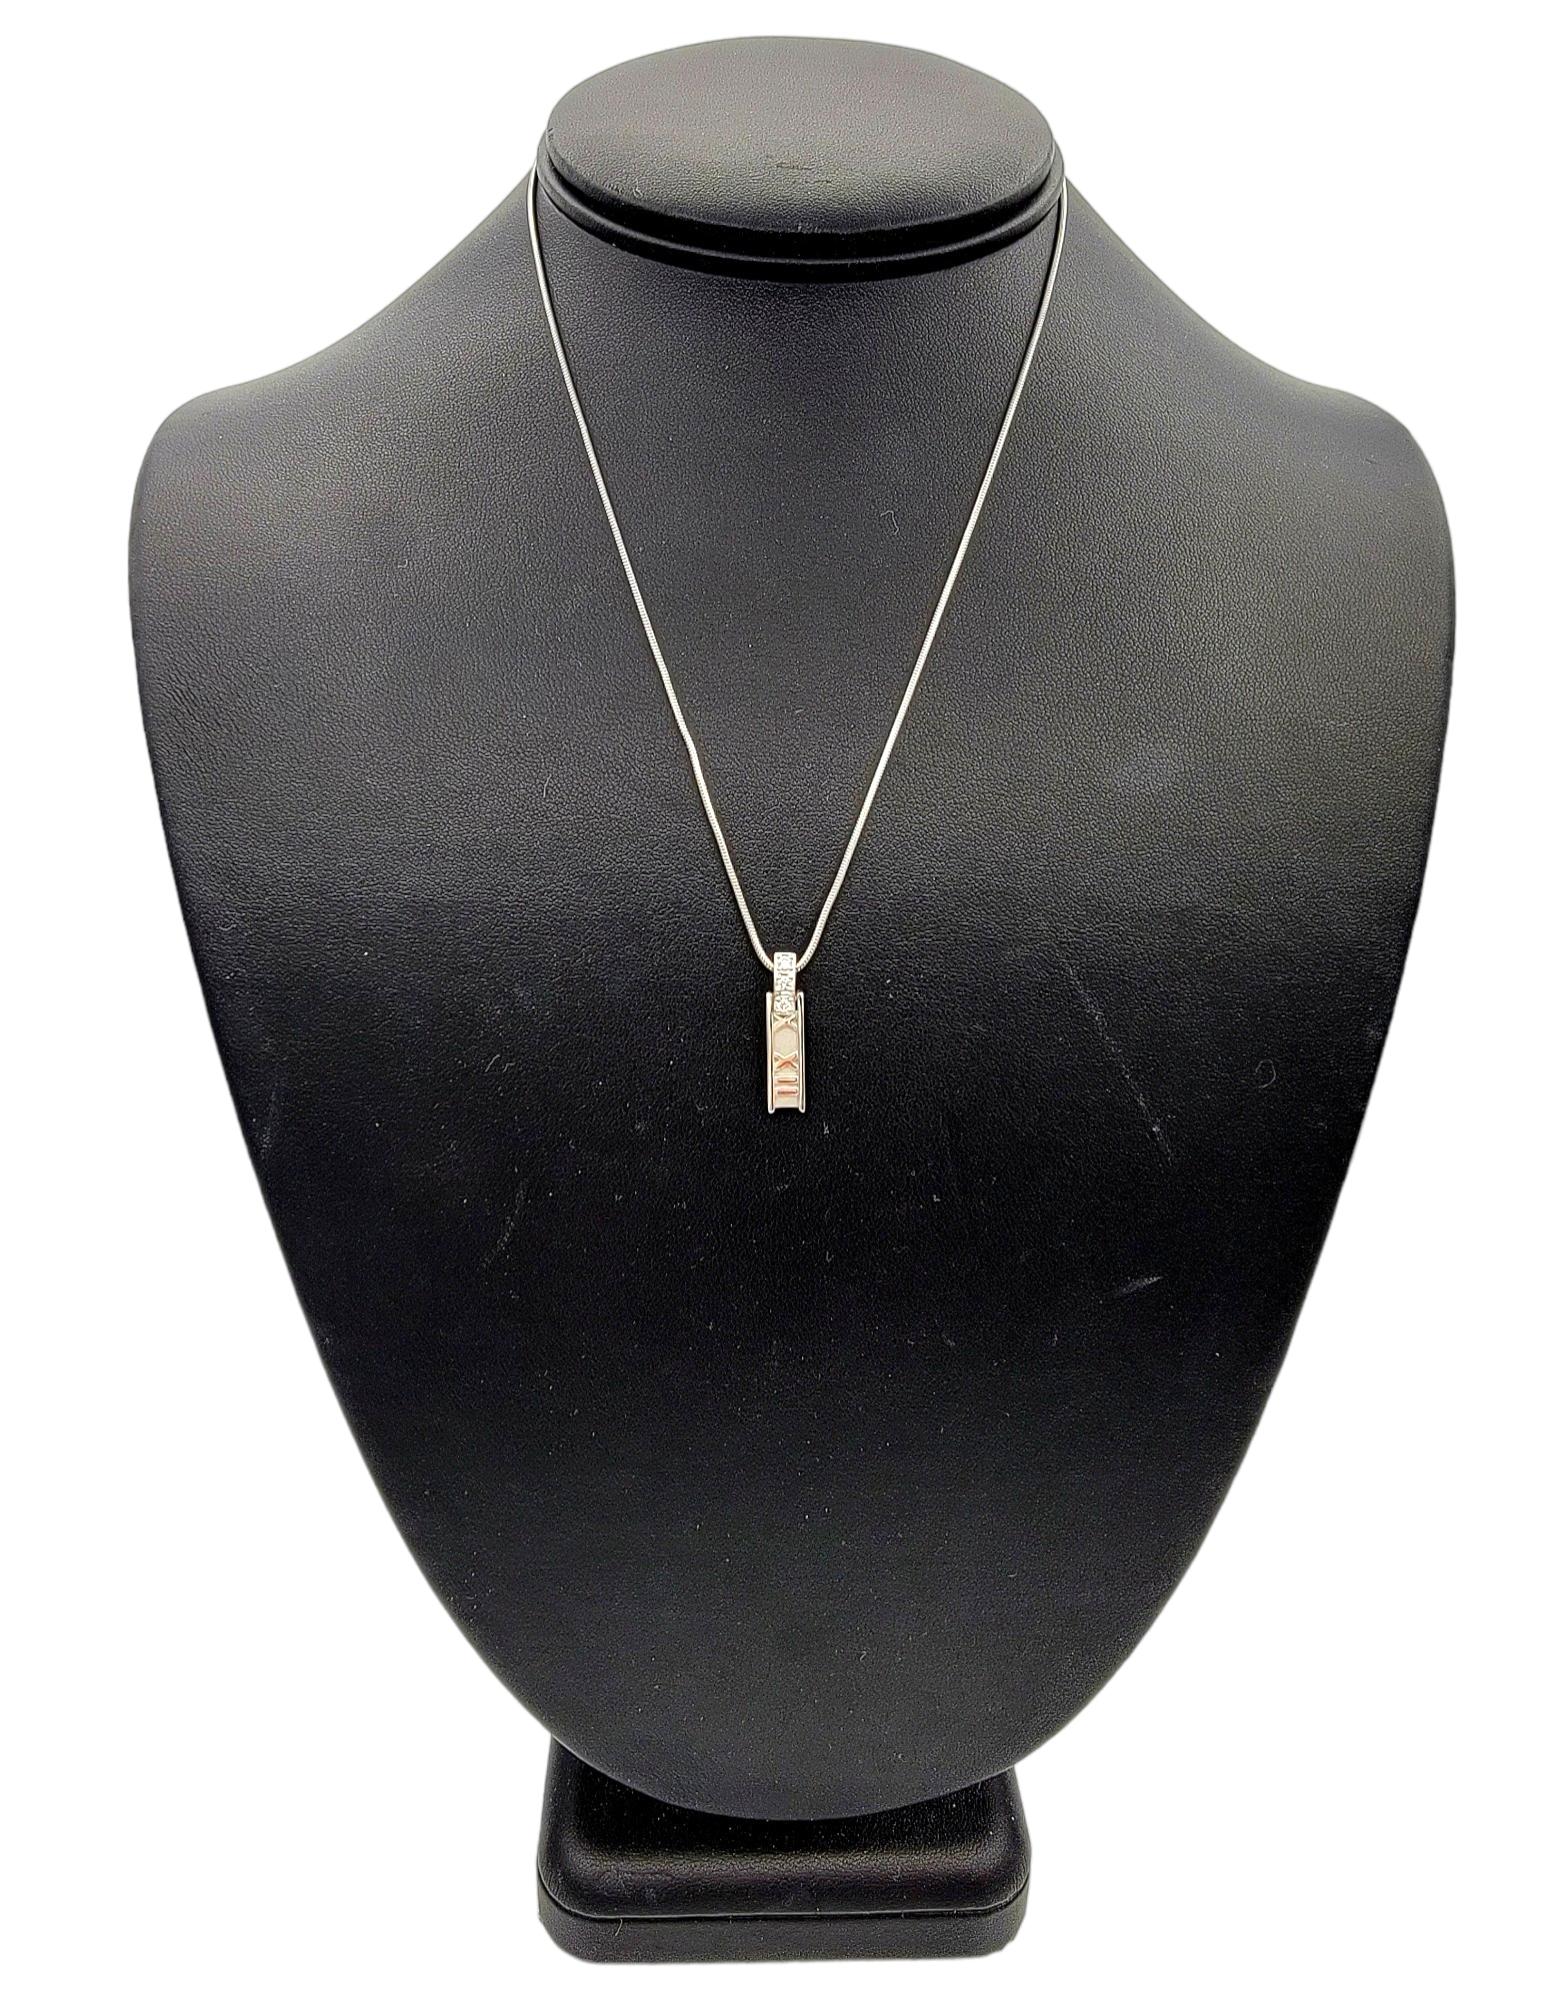 Tiffany & Co. Atlas Collection Vertical Bar Pendant Necklace with Diamonds  In Good Condition For Sale In Scottsdale, AZ